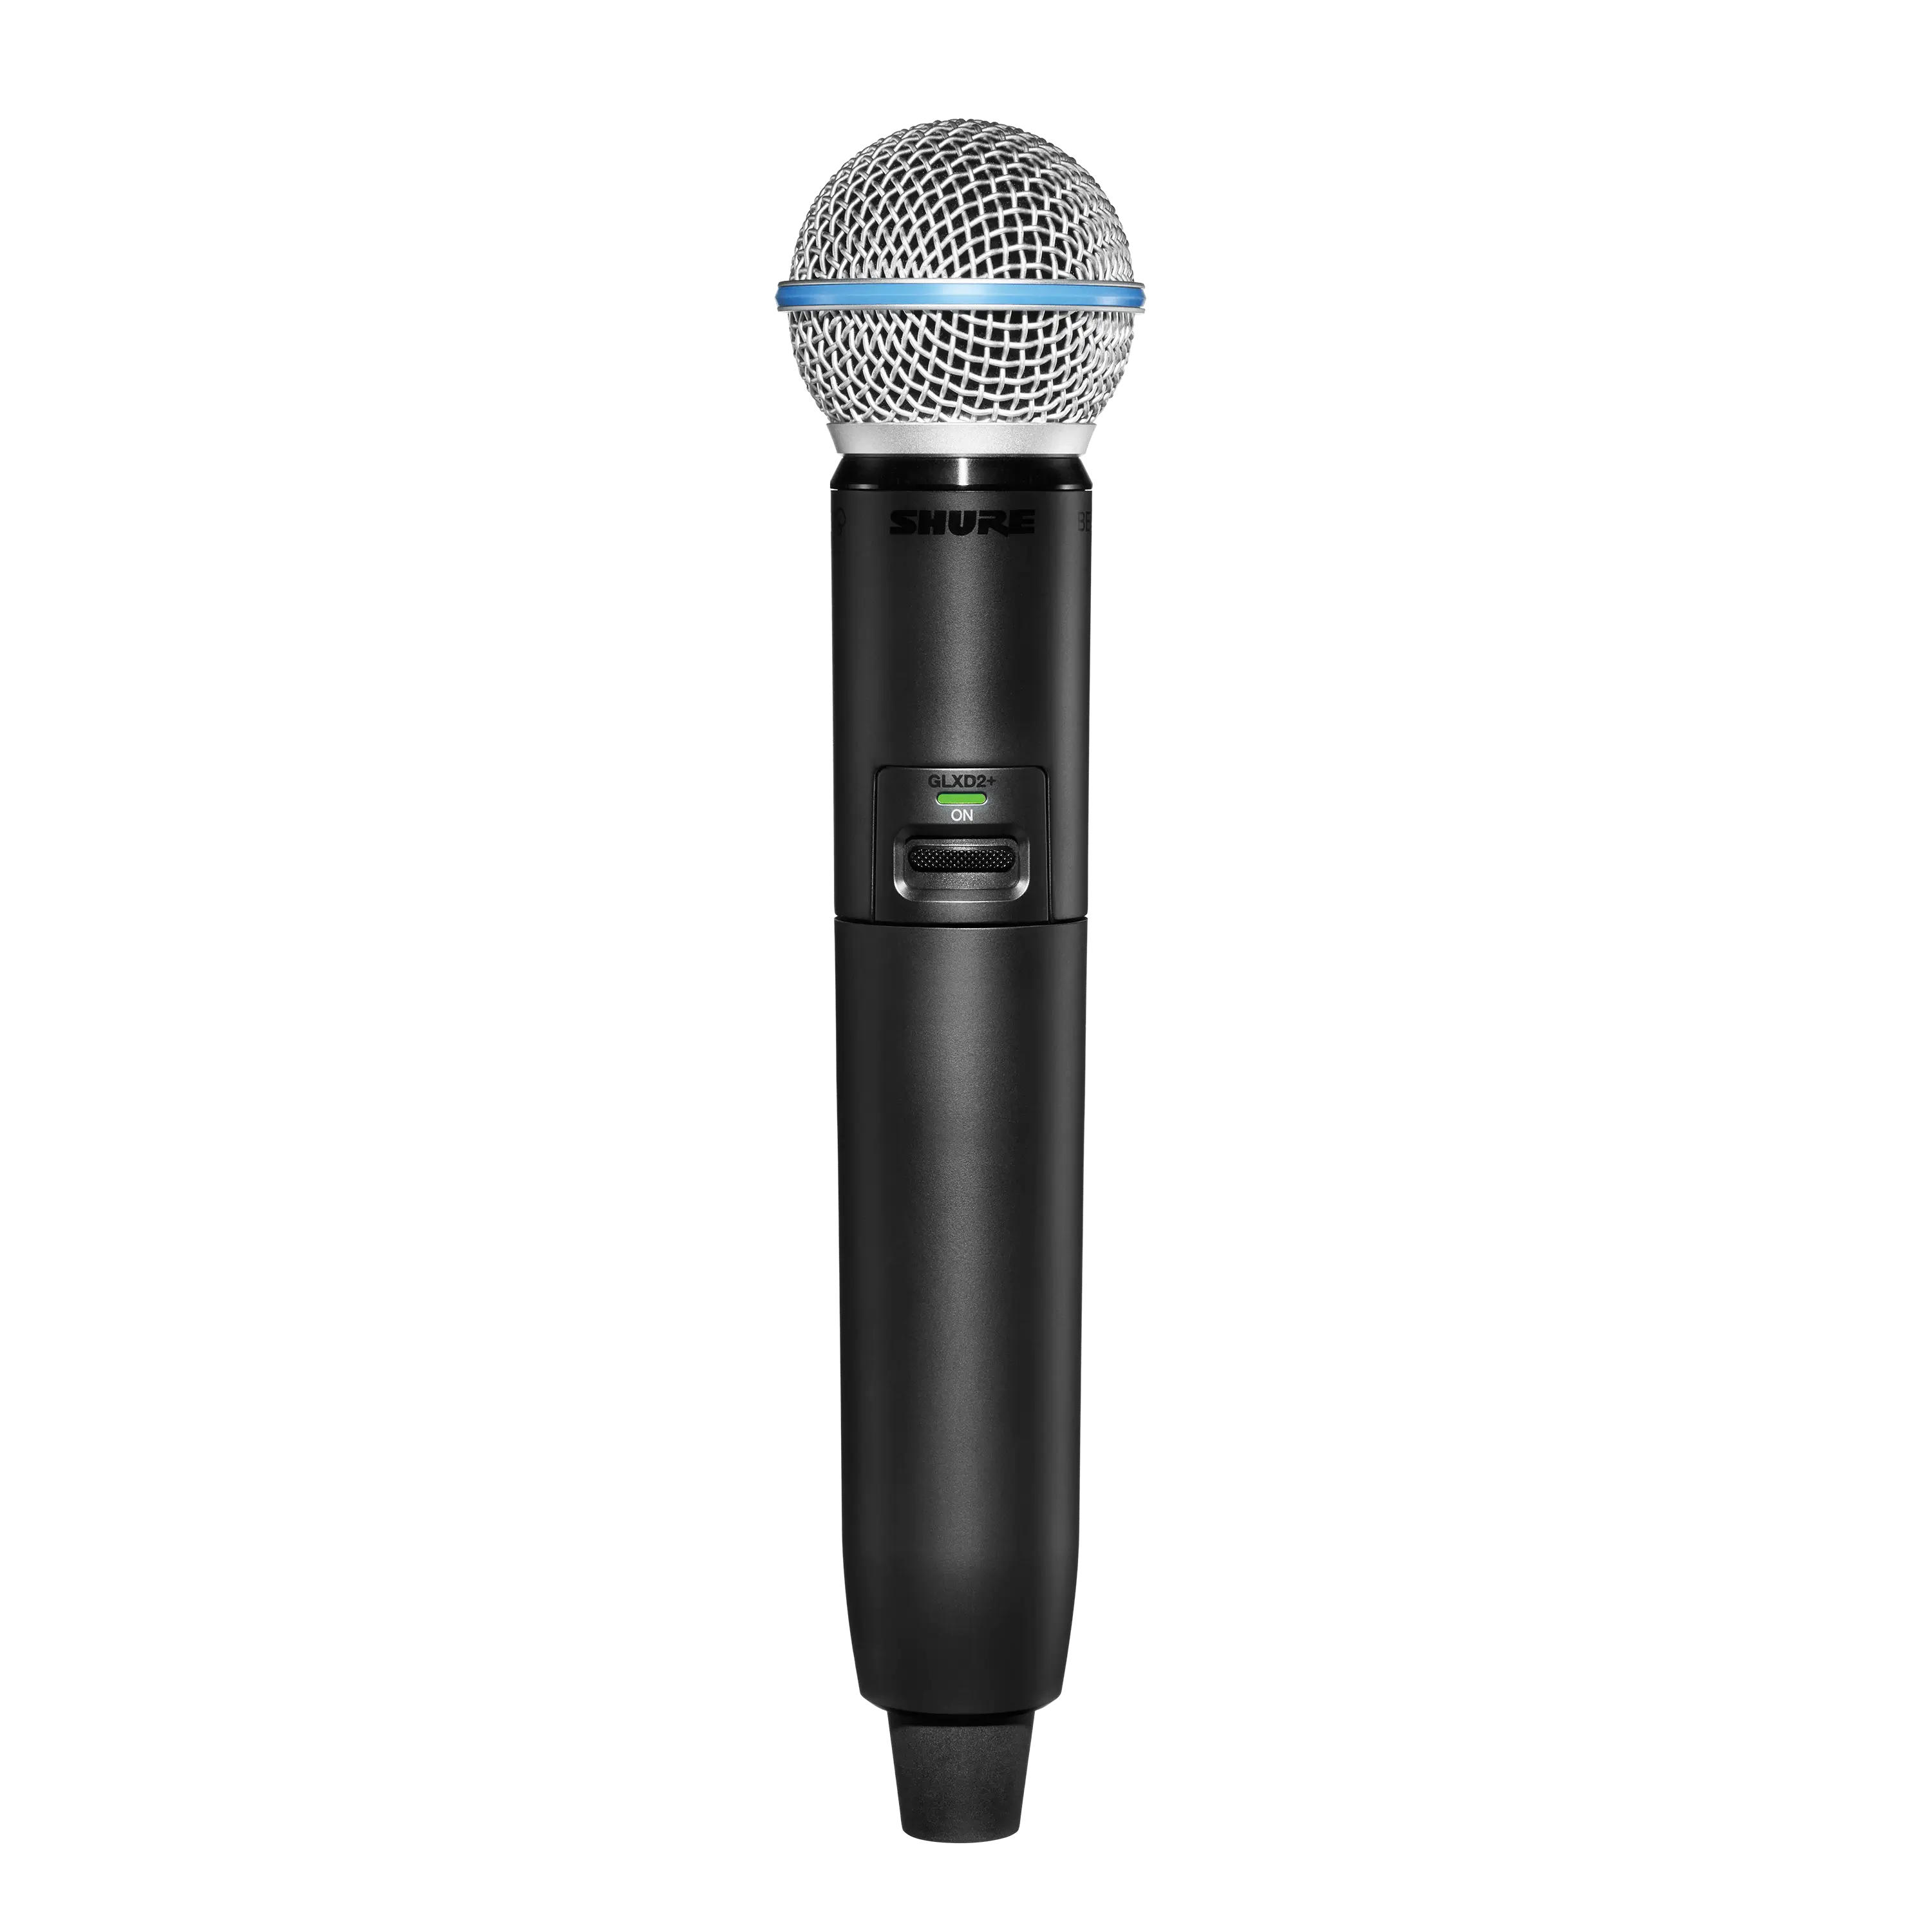 GLXD2+/B58=-Z3 Digital Wireless Dual Band Handheld Transmitter with BETA 58A Vocal Microphone